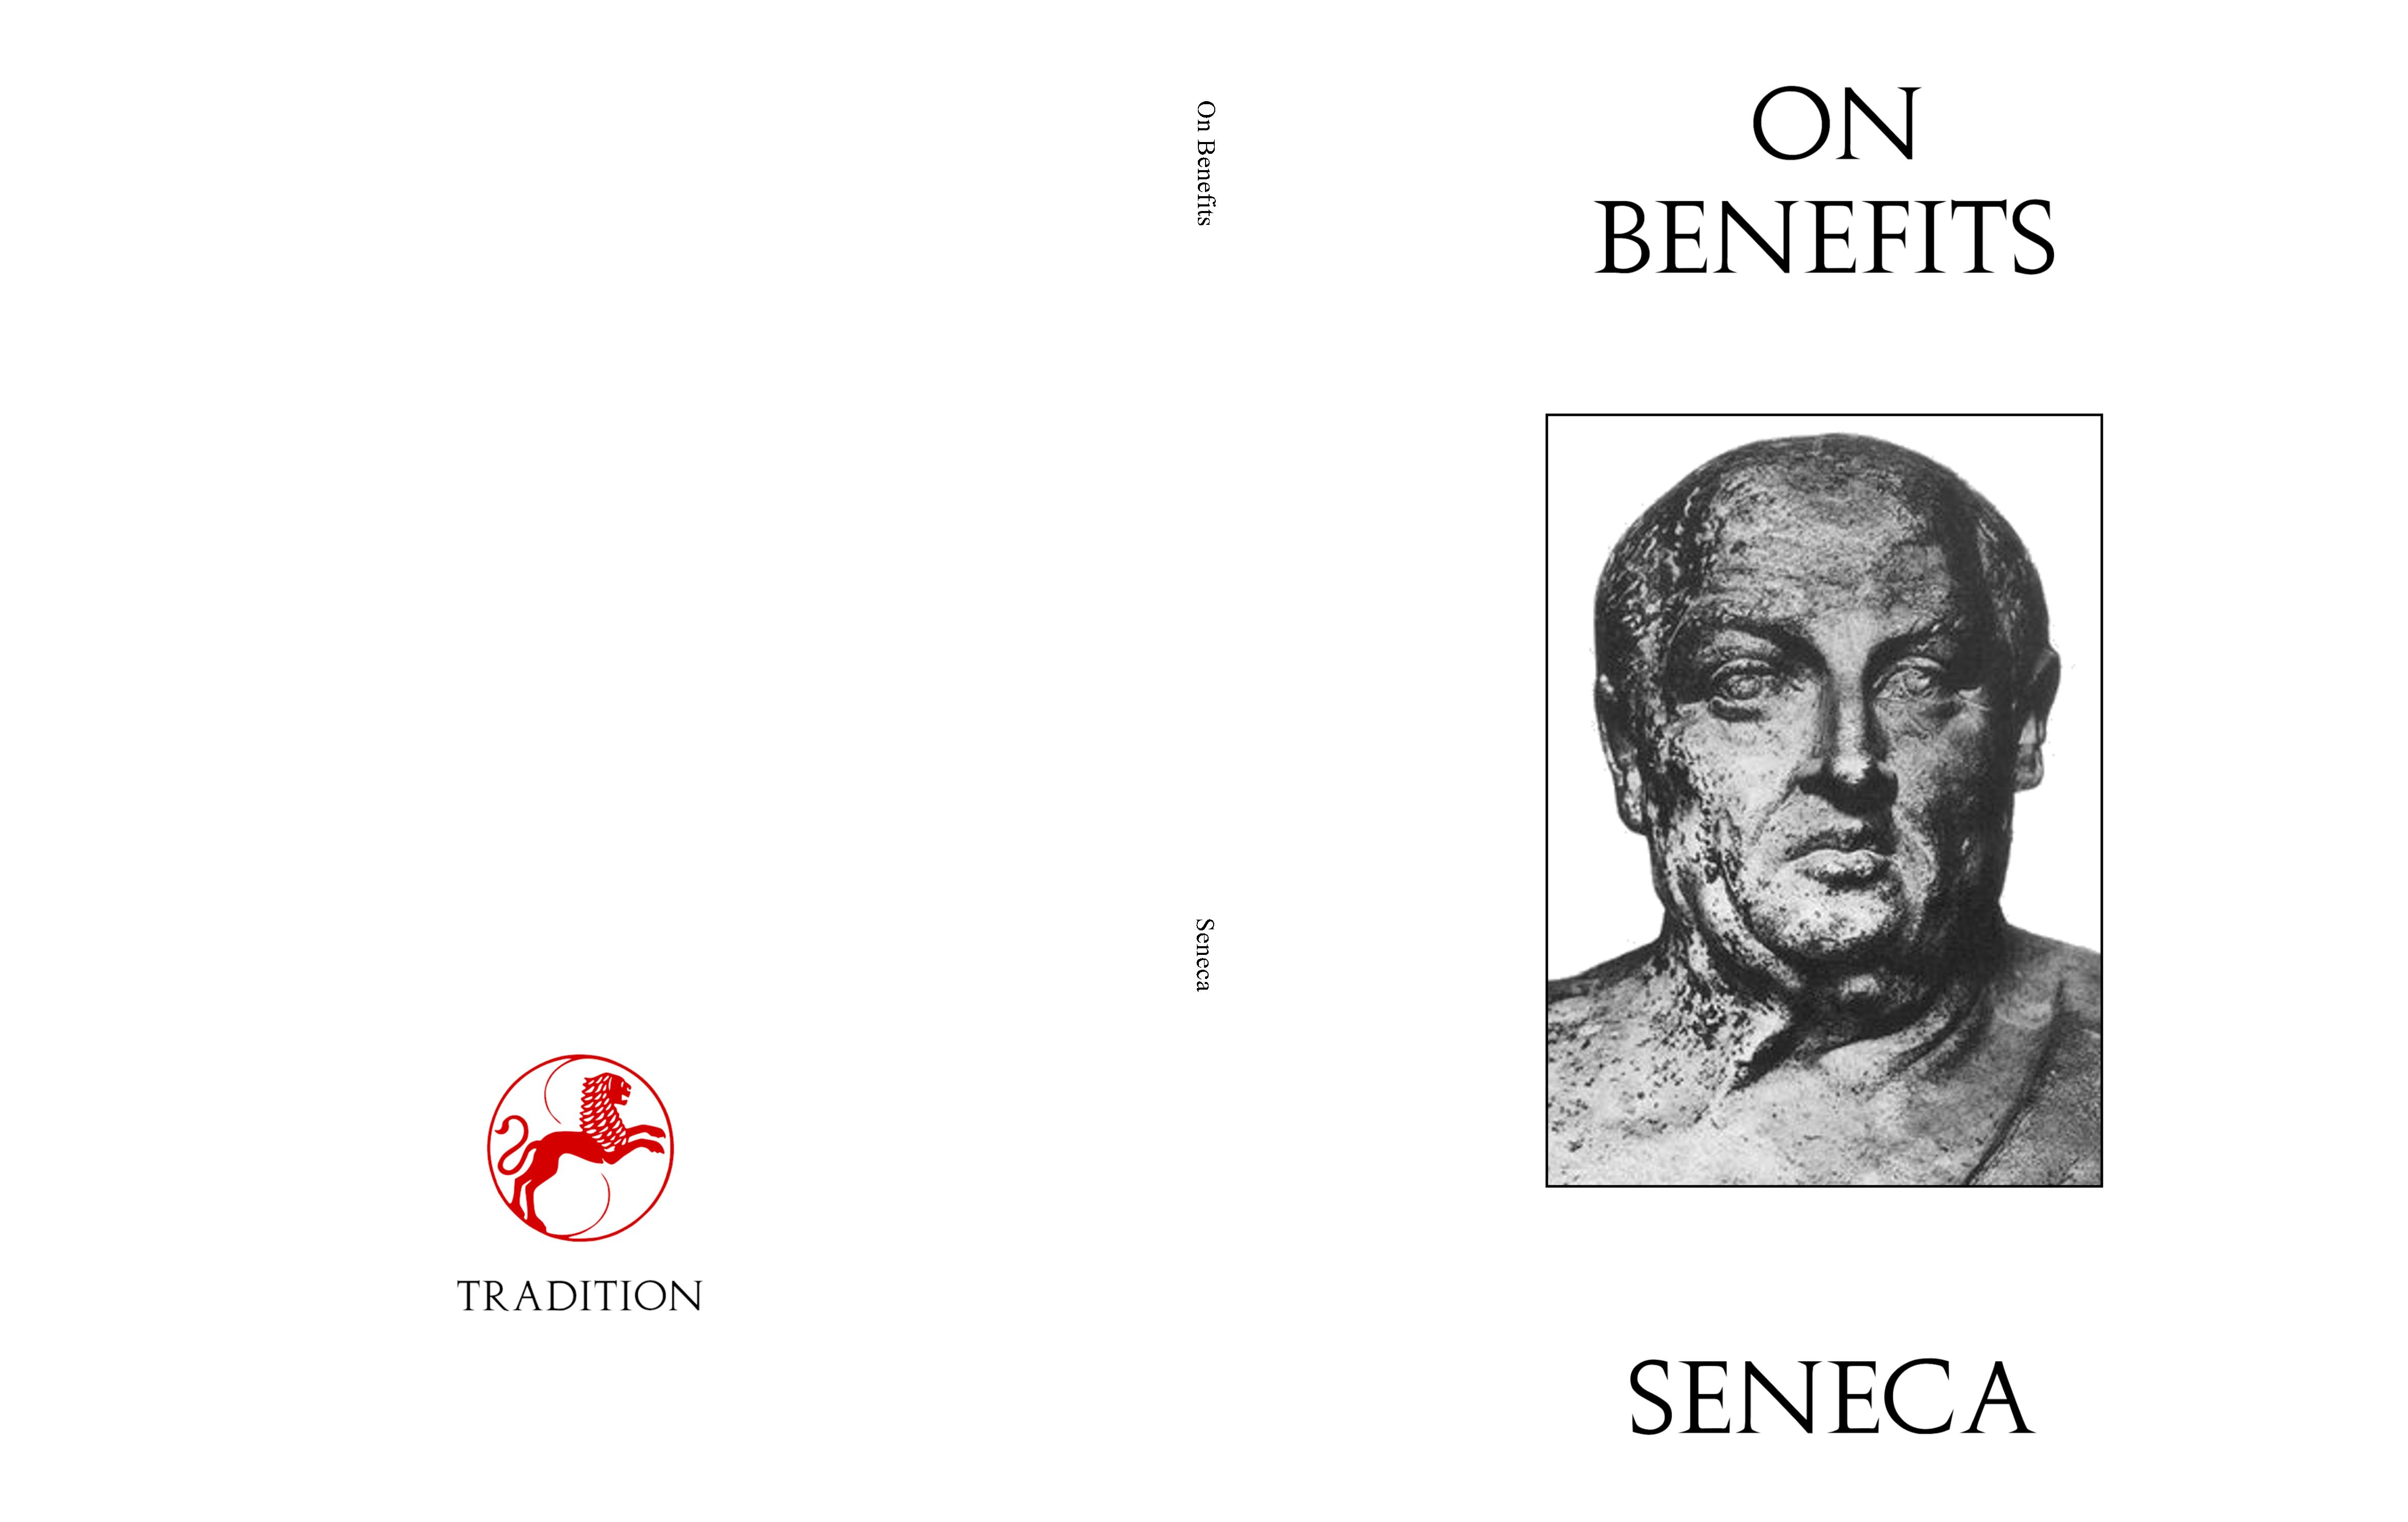 On Benefits cover image